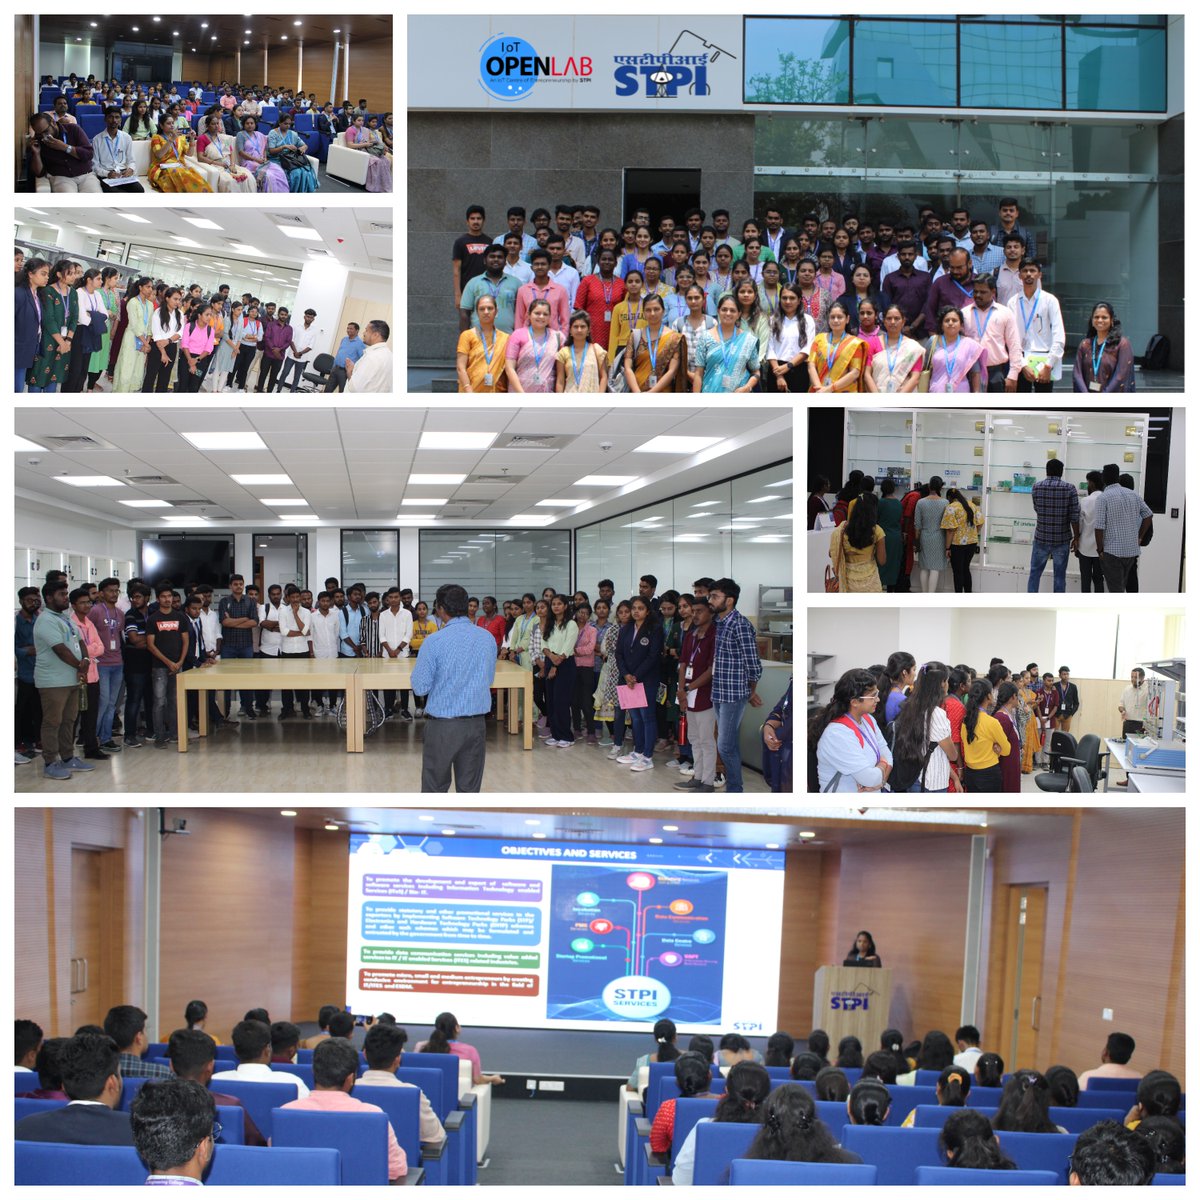 Students from CITY Engineering College, Dept of MCA, AI/ML and ISE, visited IoT OpenLab for an Industrial Visit. Students were briefed about STPI Services, CoEs & new internship program introduced for students with IoT and Electronic Hardware projects. @arvindtw @Shail2108